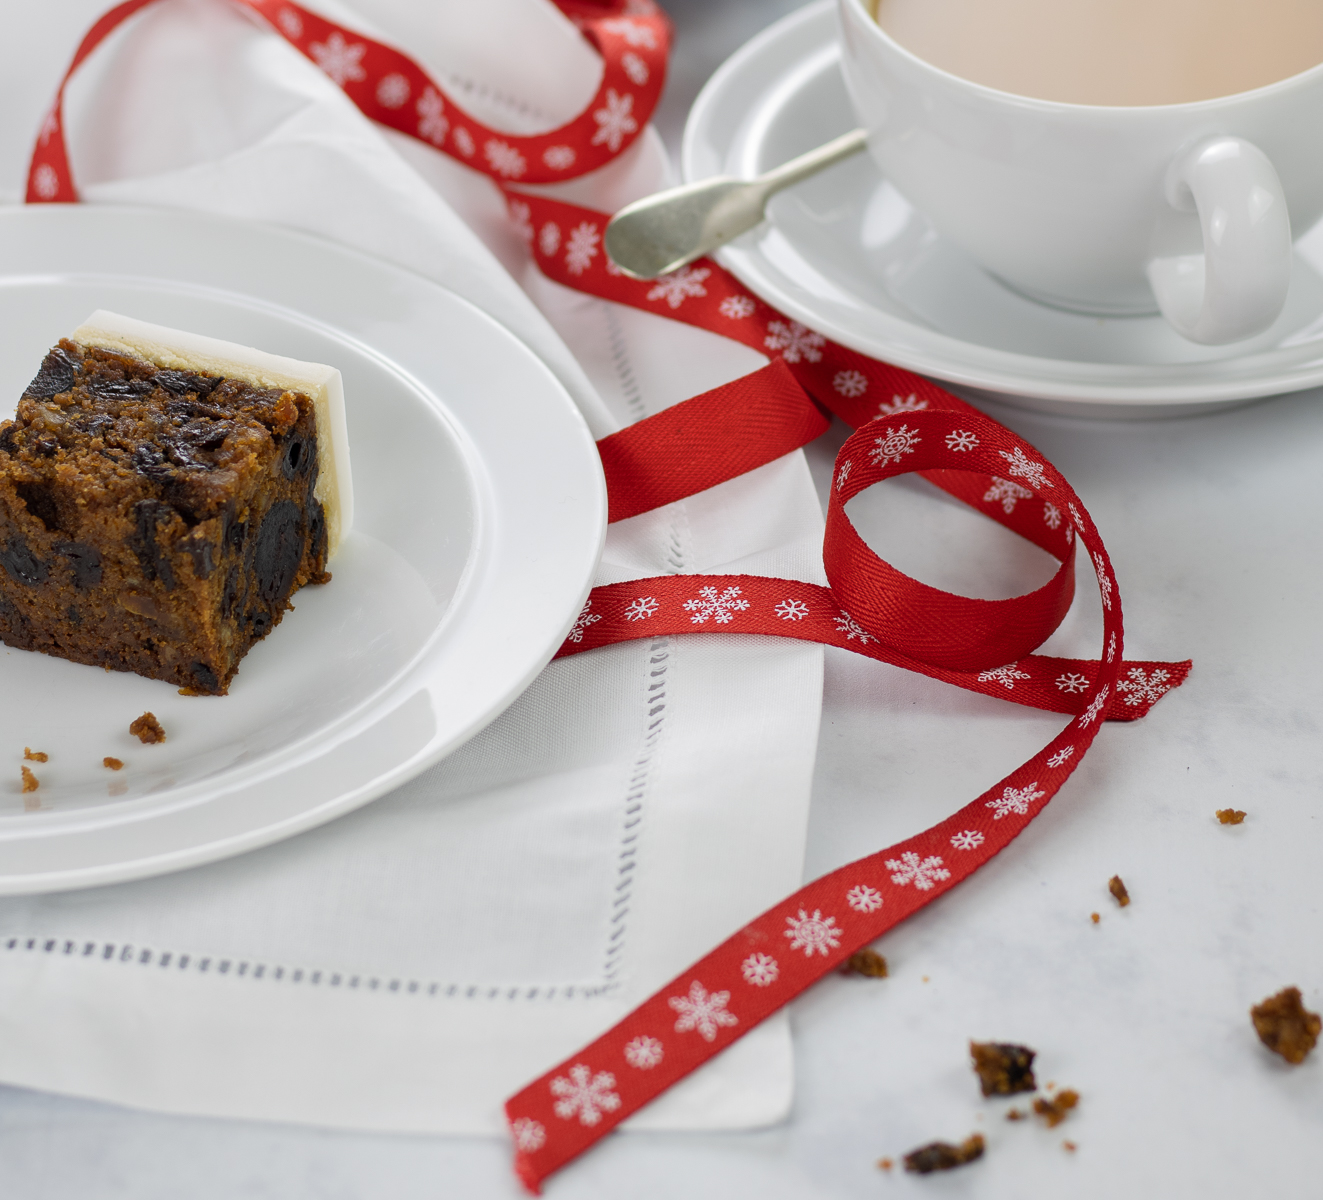 Xmas cake with red ribbon on plate with crumbs and tea